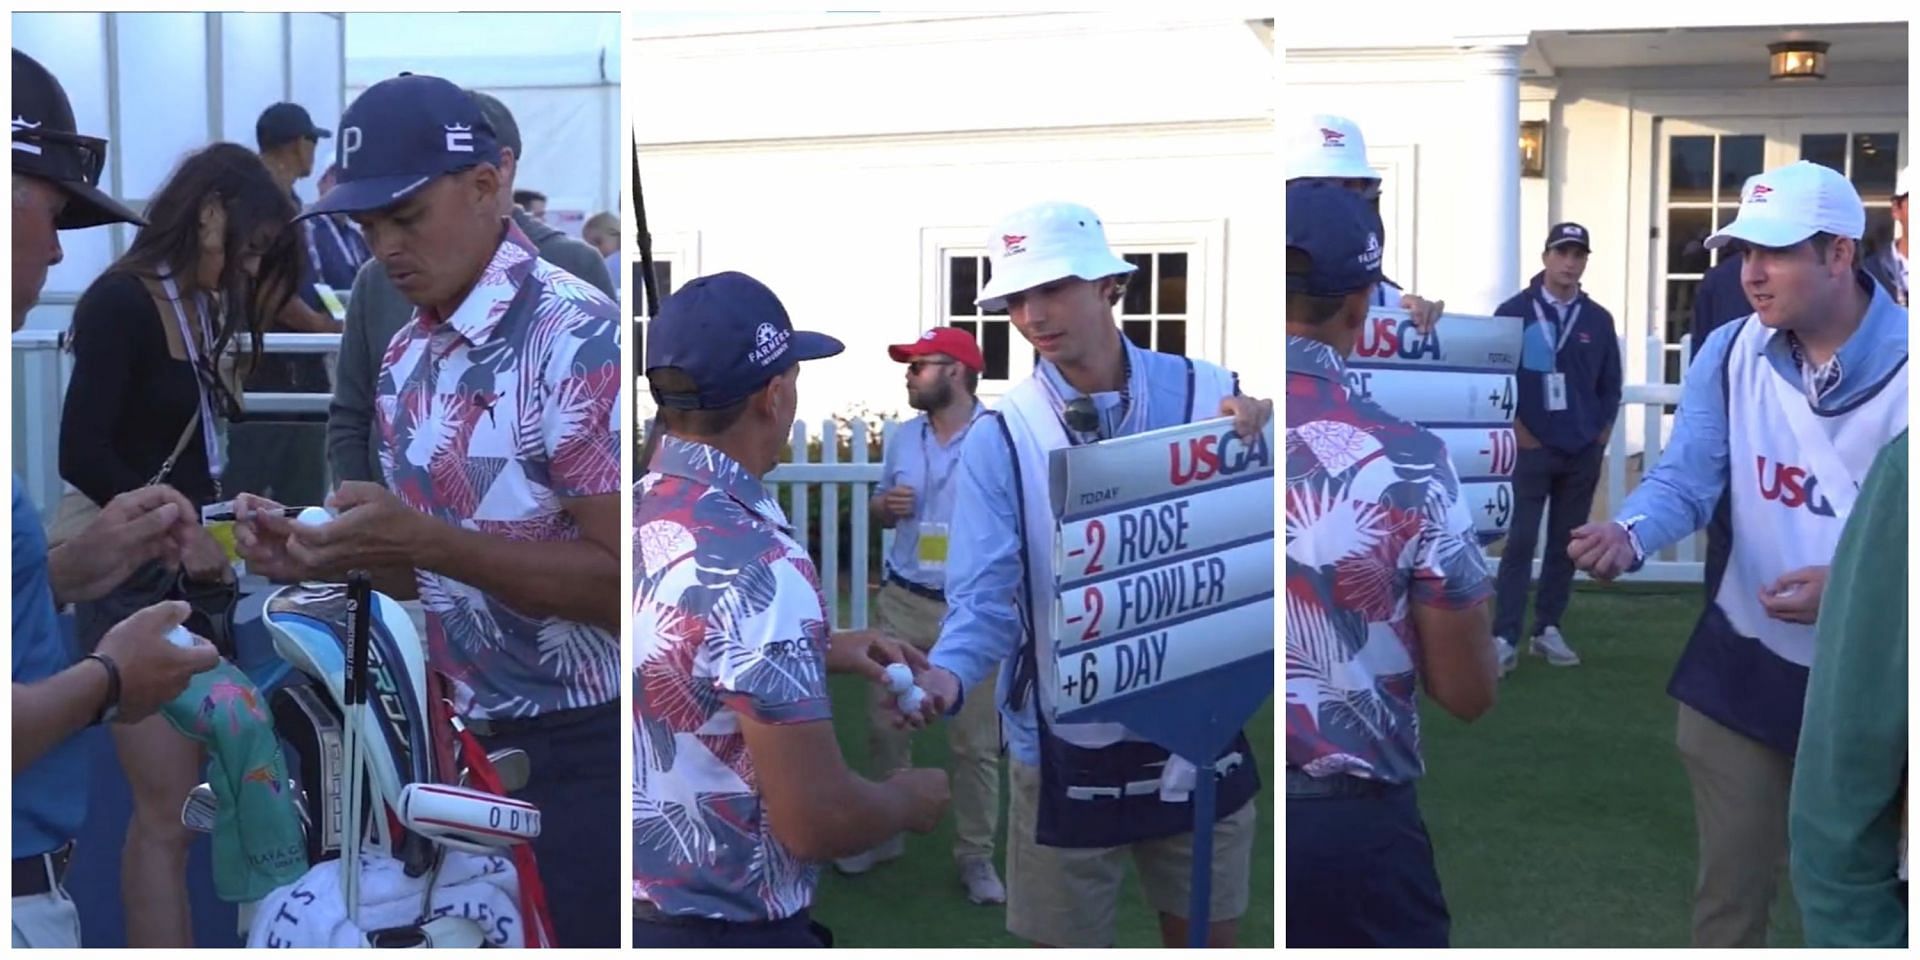 Fowler was seen gifting signed balls to the standard bearers after taking a 36-hole lead  at the US Open